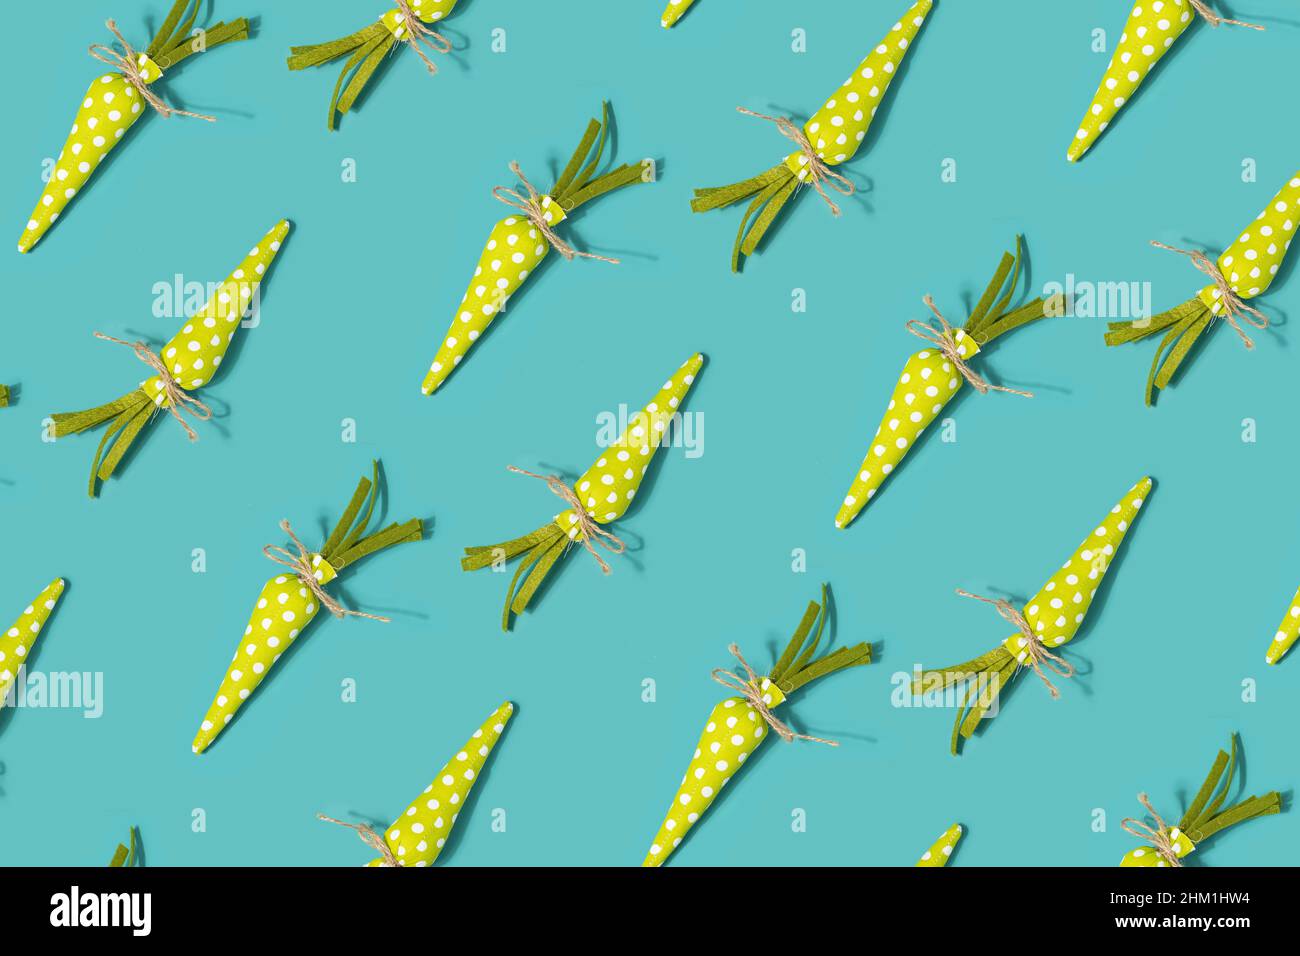 Green fabric carrots pattern on a turquoise background. Spring, Easter minimal flat lay. Stock Photo